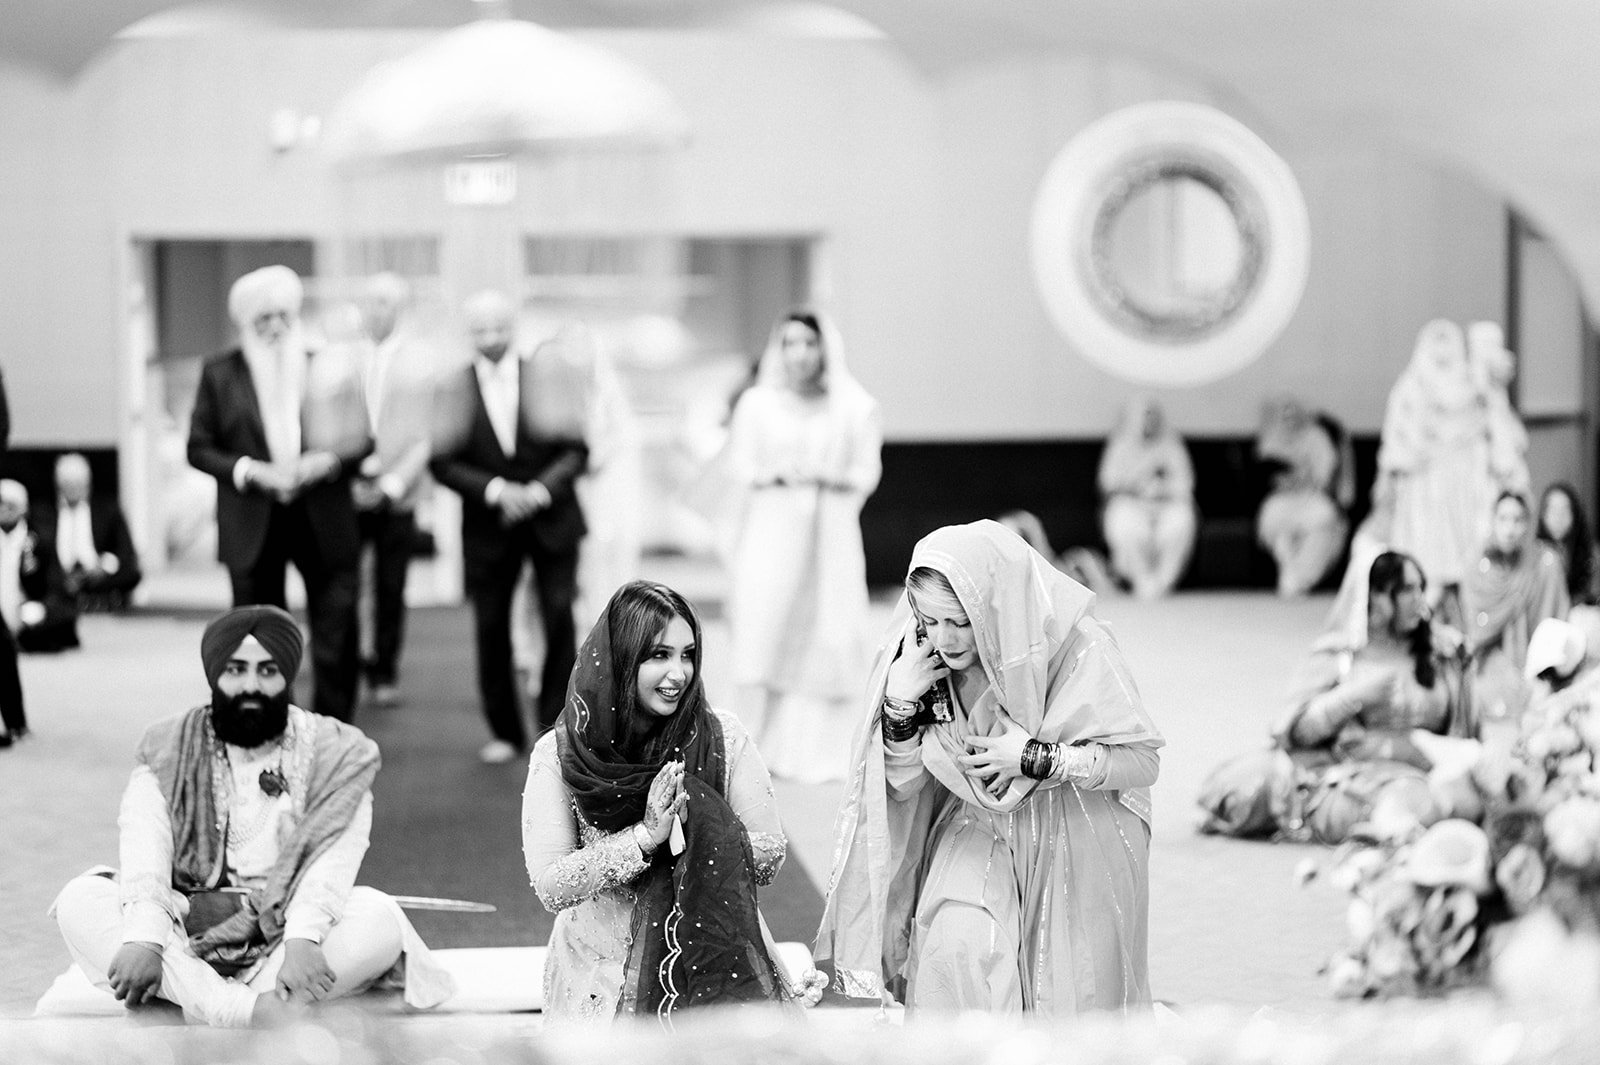 Two friends make an offering before a wedding ceremony